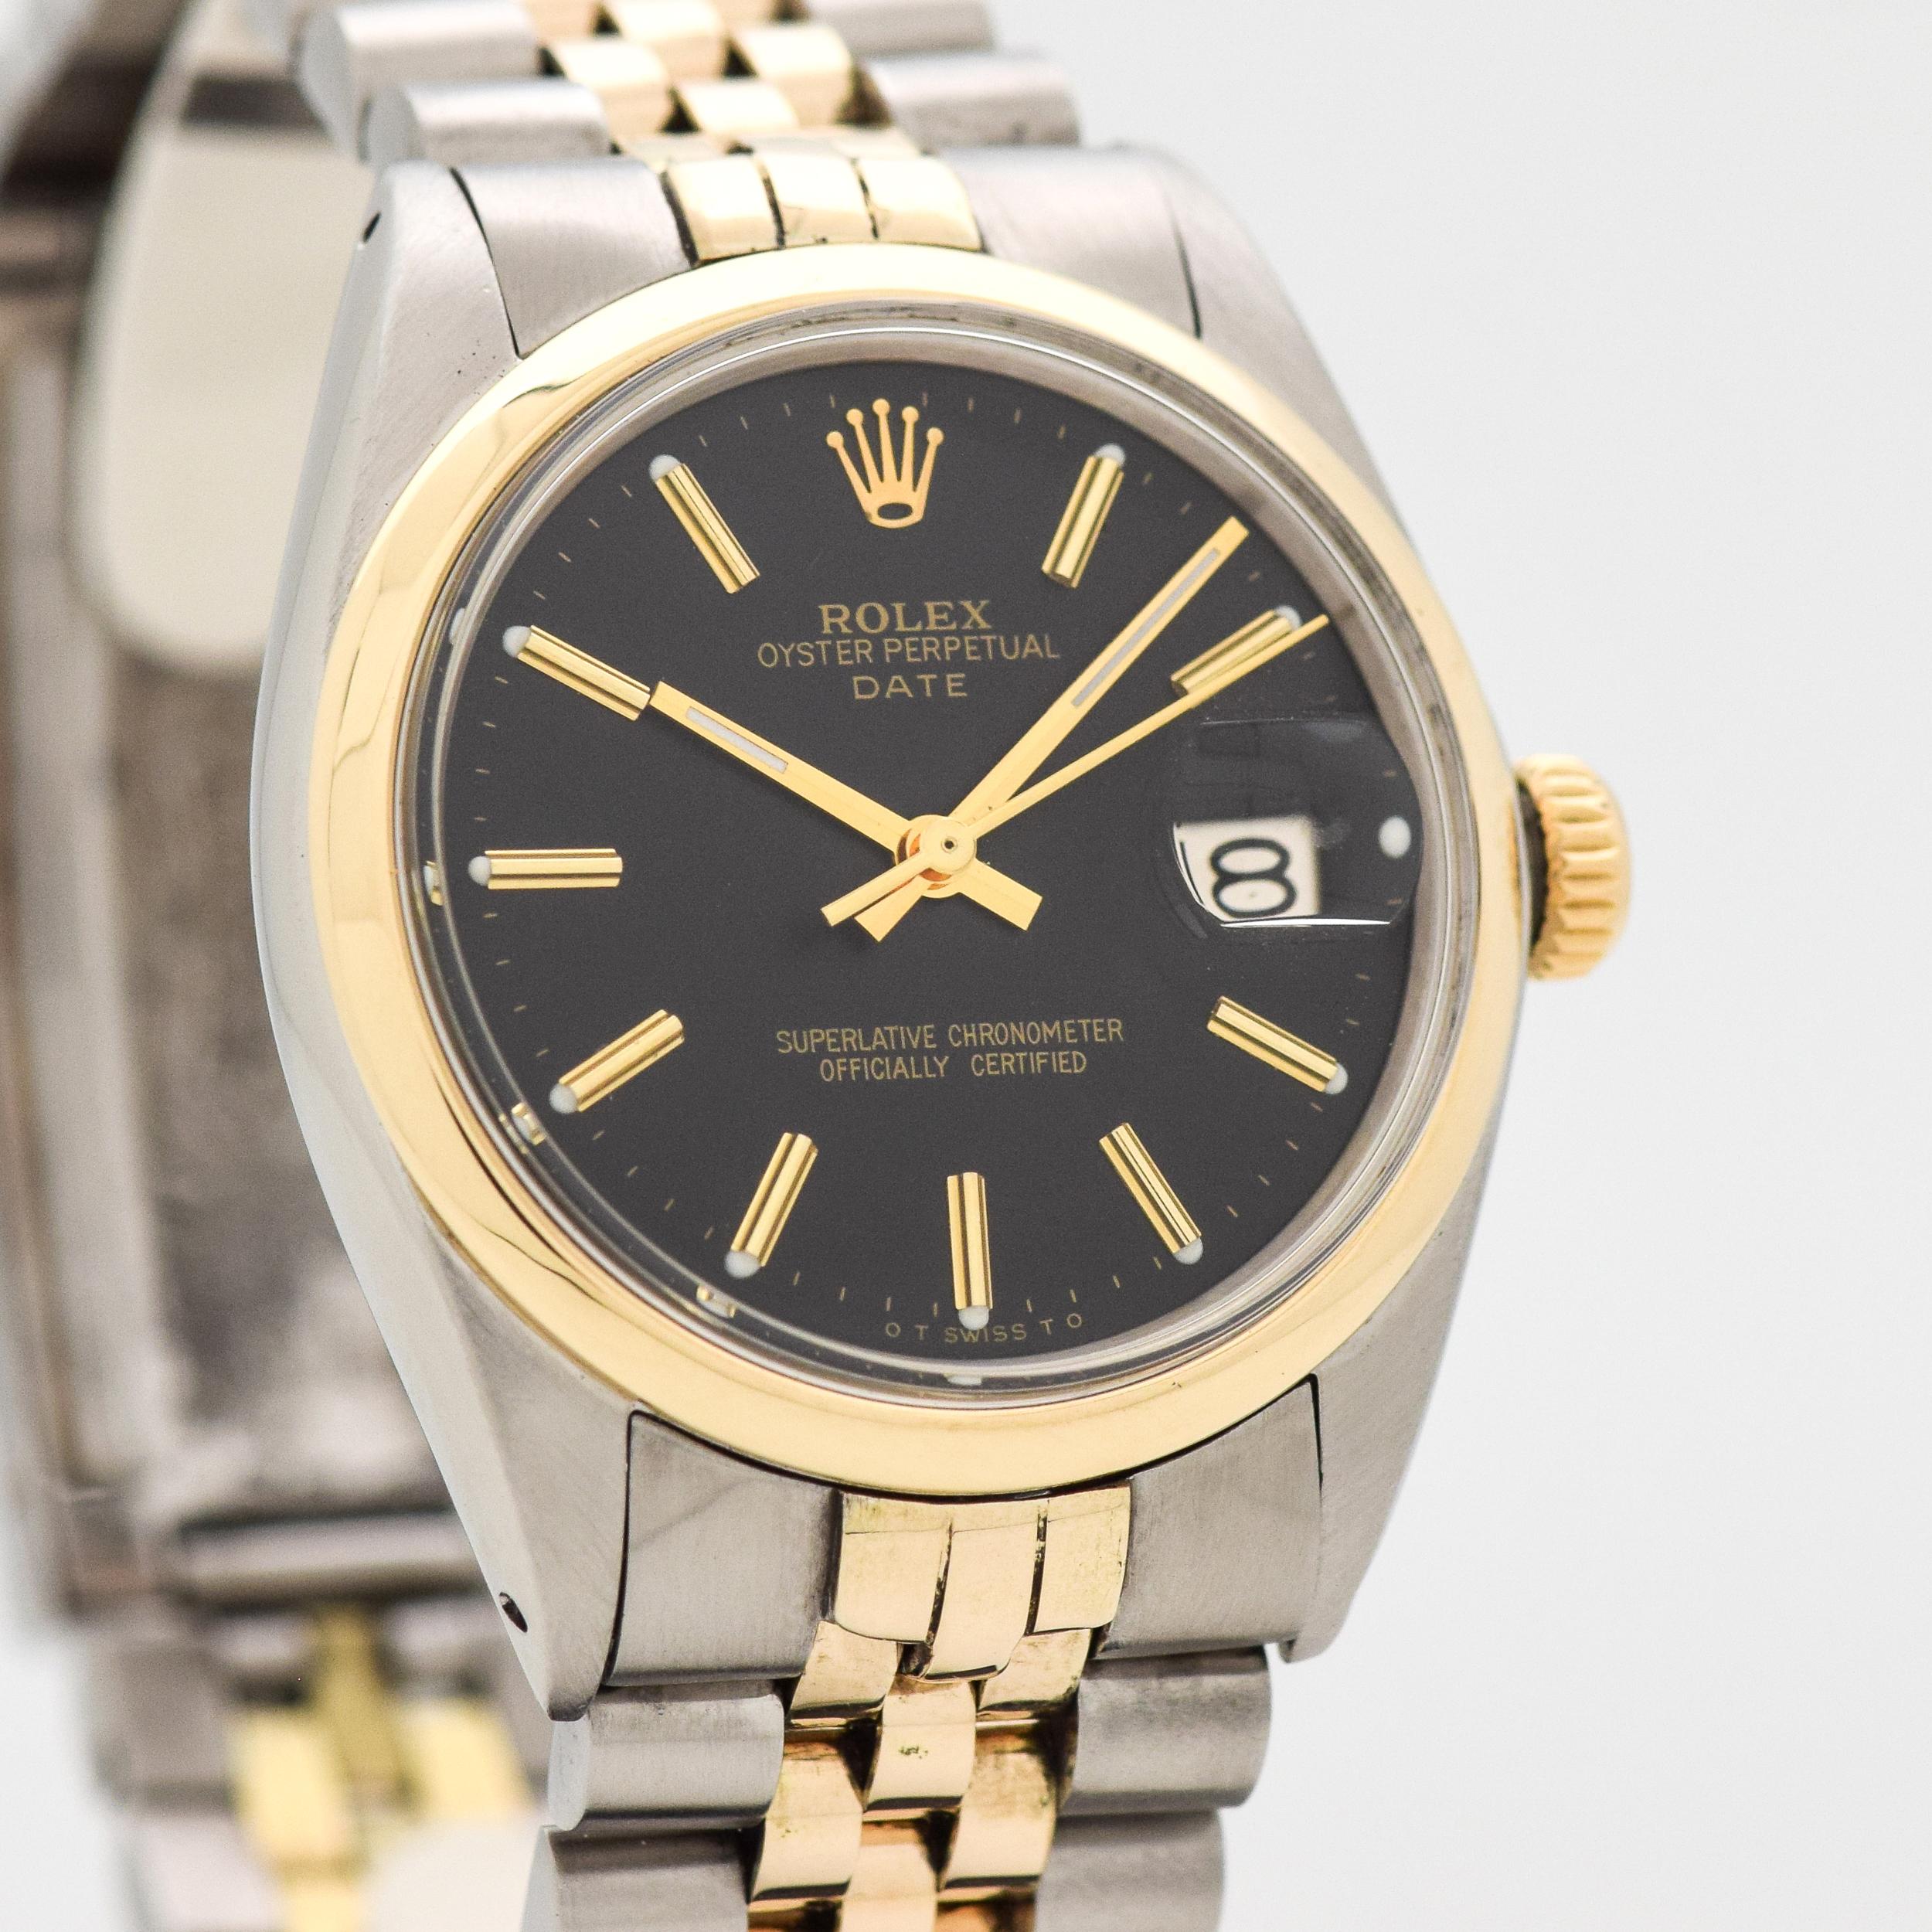 1969 Vintage Rolex Date Automatic Ref. 1500 Two Tone 14k Yellow Gold and Stainless Steel watch with Original Black Dial with Yellow Gold Beveled Stick/Bar/Baton Markers with Newer Rolex Two Tone 'D'Link 14k yellow Gold and Stainless Steel Jubilee